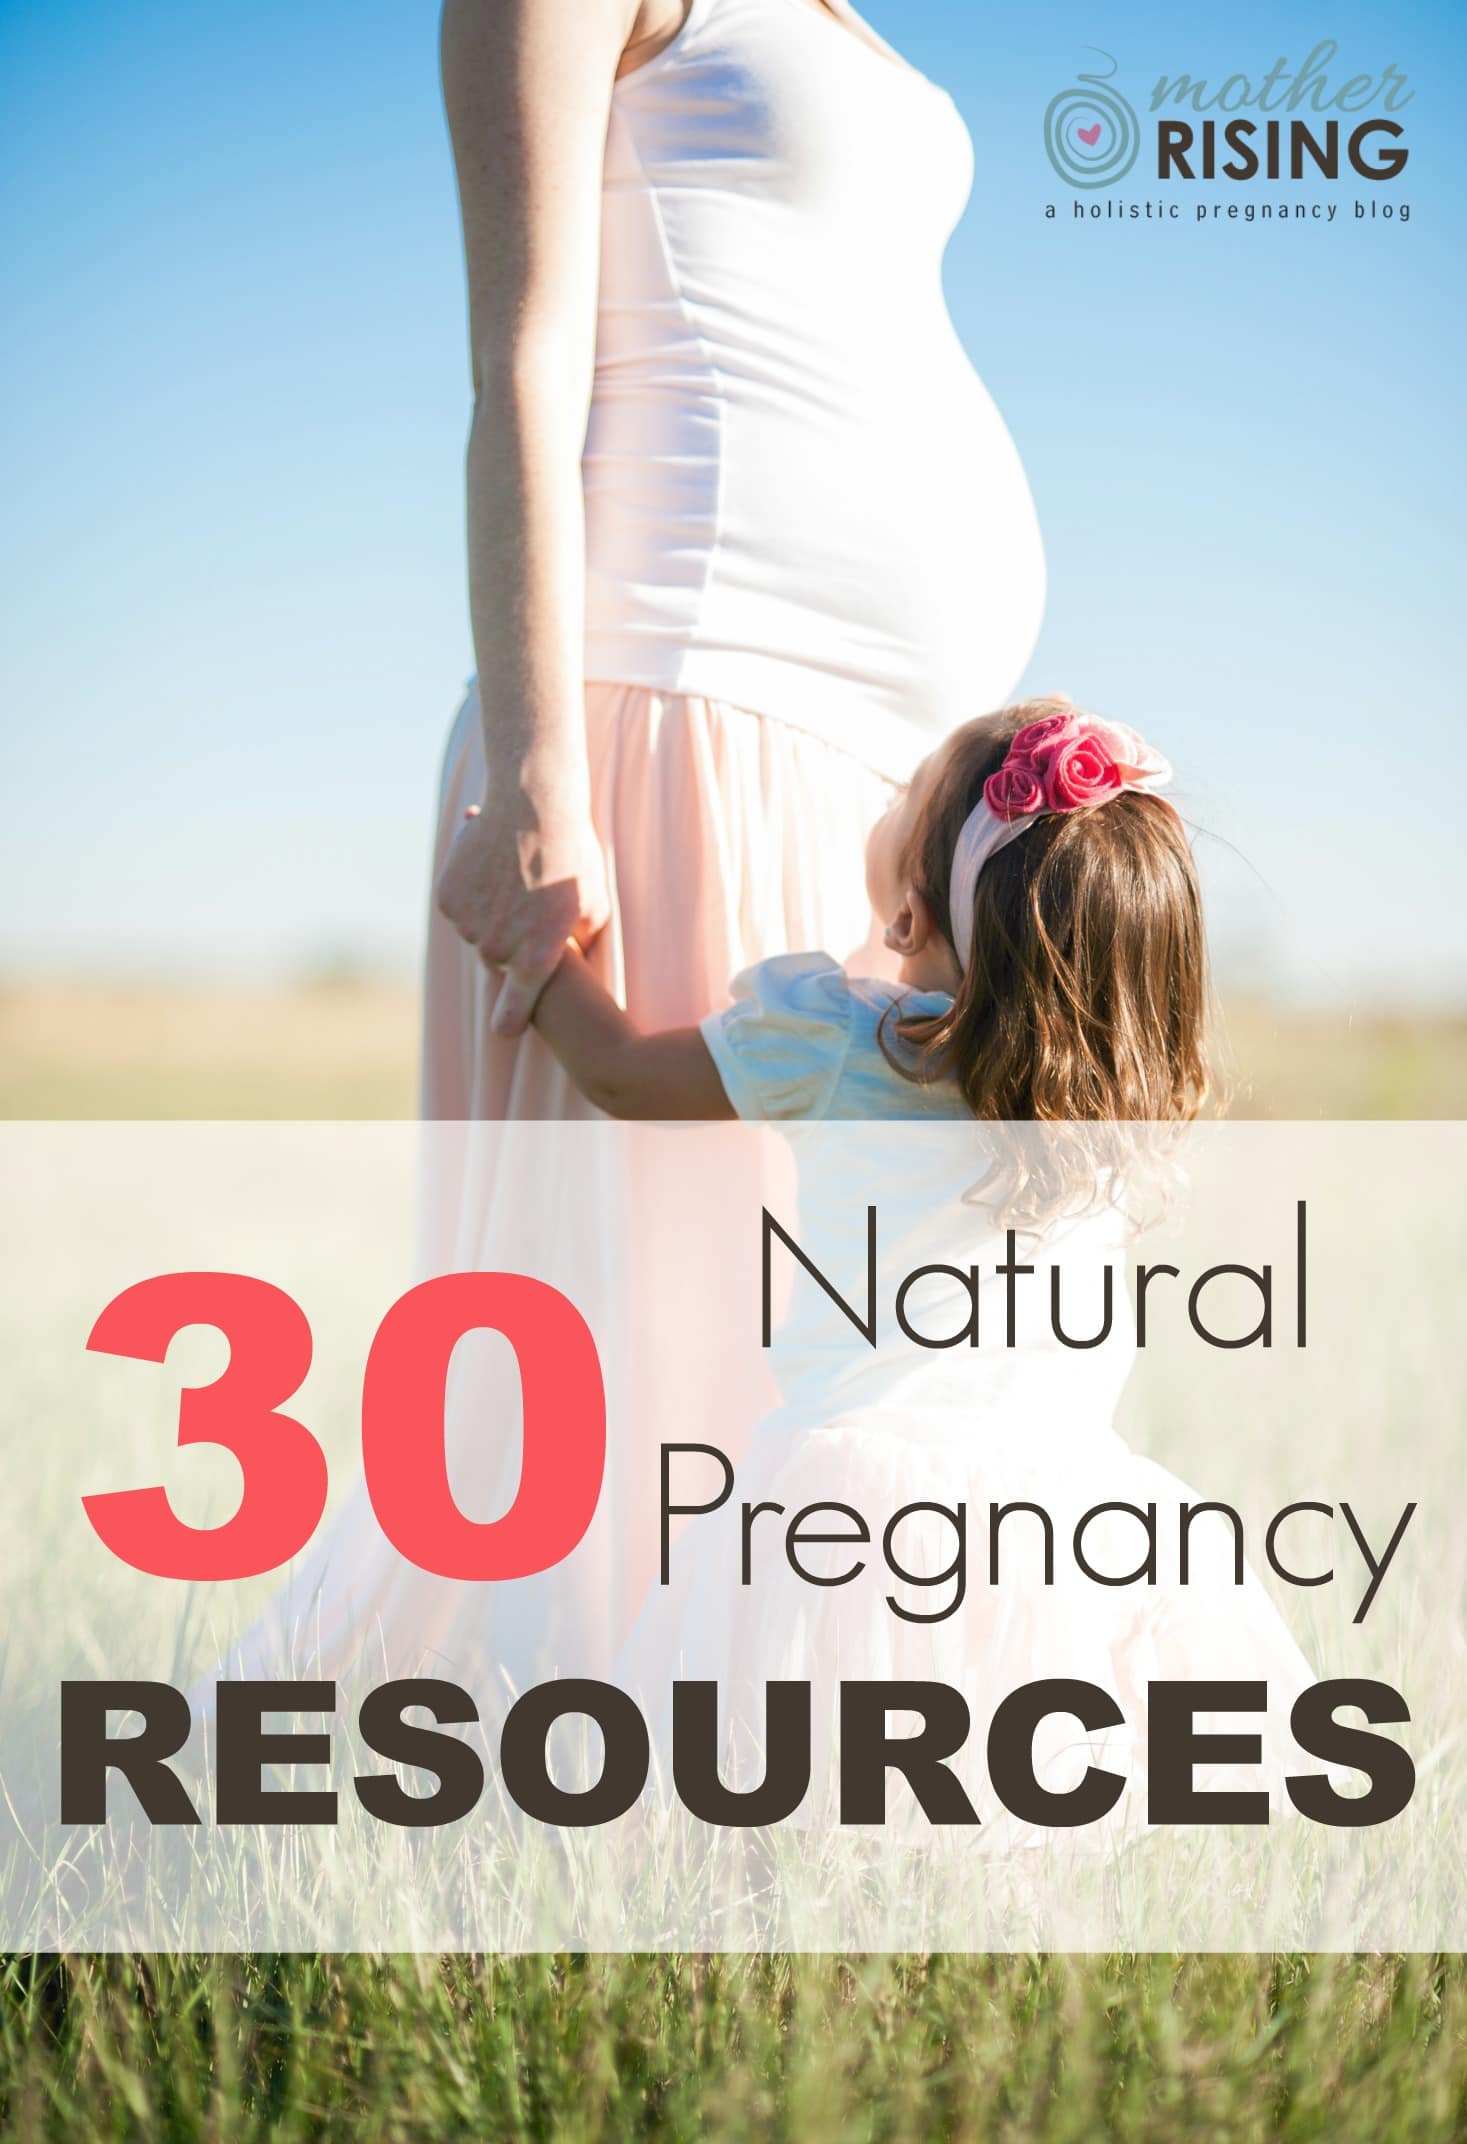 Here are the top 30 natural pregnancy resources that I have personally used for a natural pregnancy, birth and postpartum.